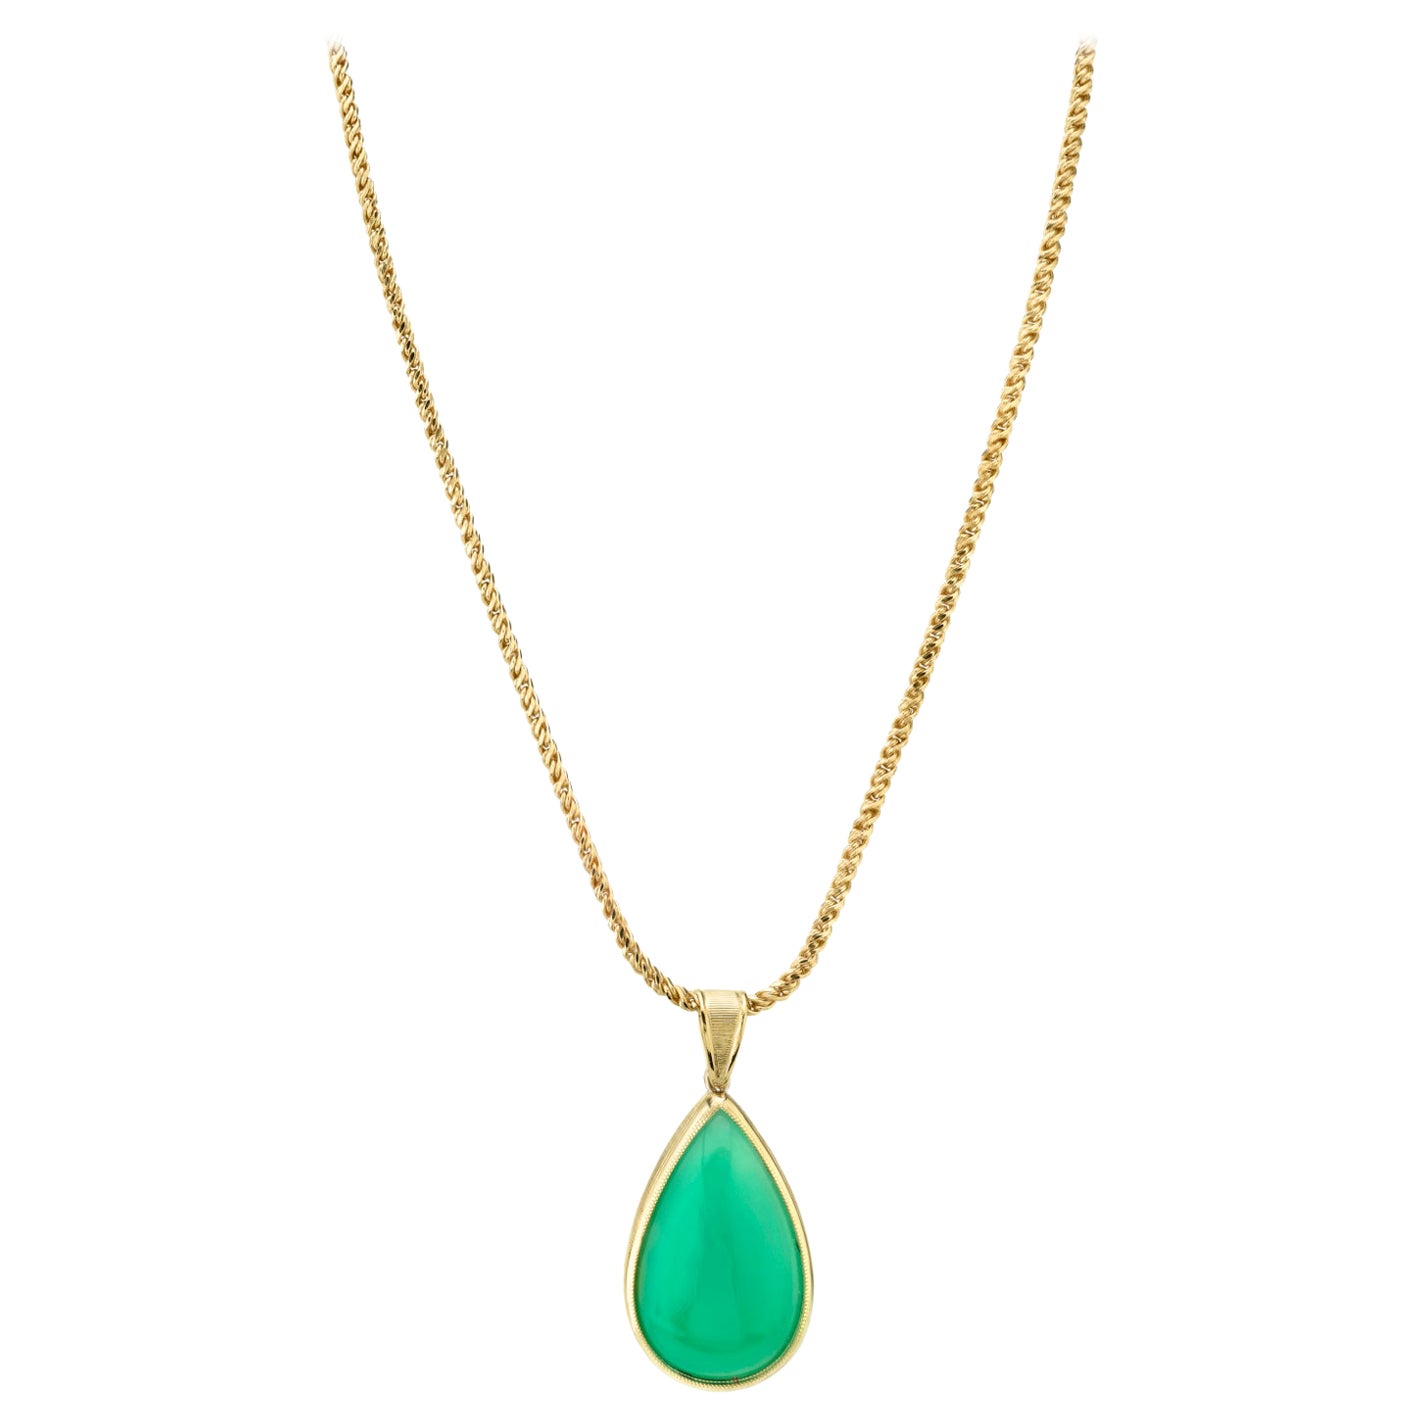 18K Yellow Gold Chain with a Pendant Set with Four Tourmalines ...